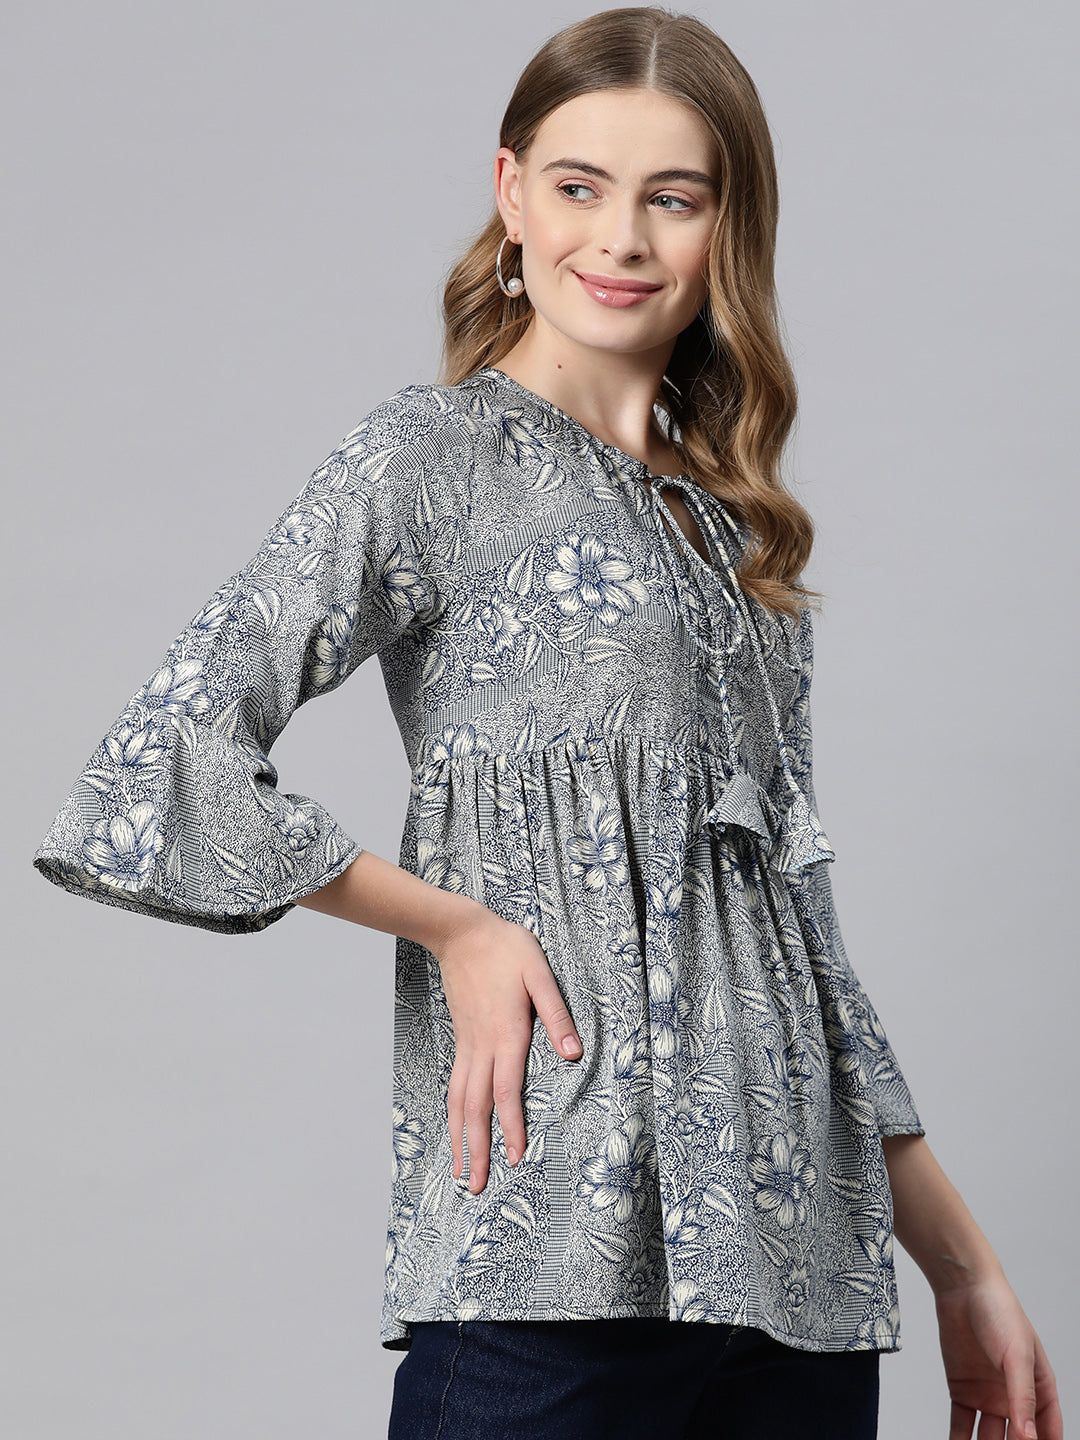 Cottinfab Floral Print Tie-Up Neck Bell Sleeve Crepe Empire Top